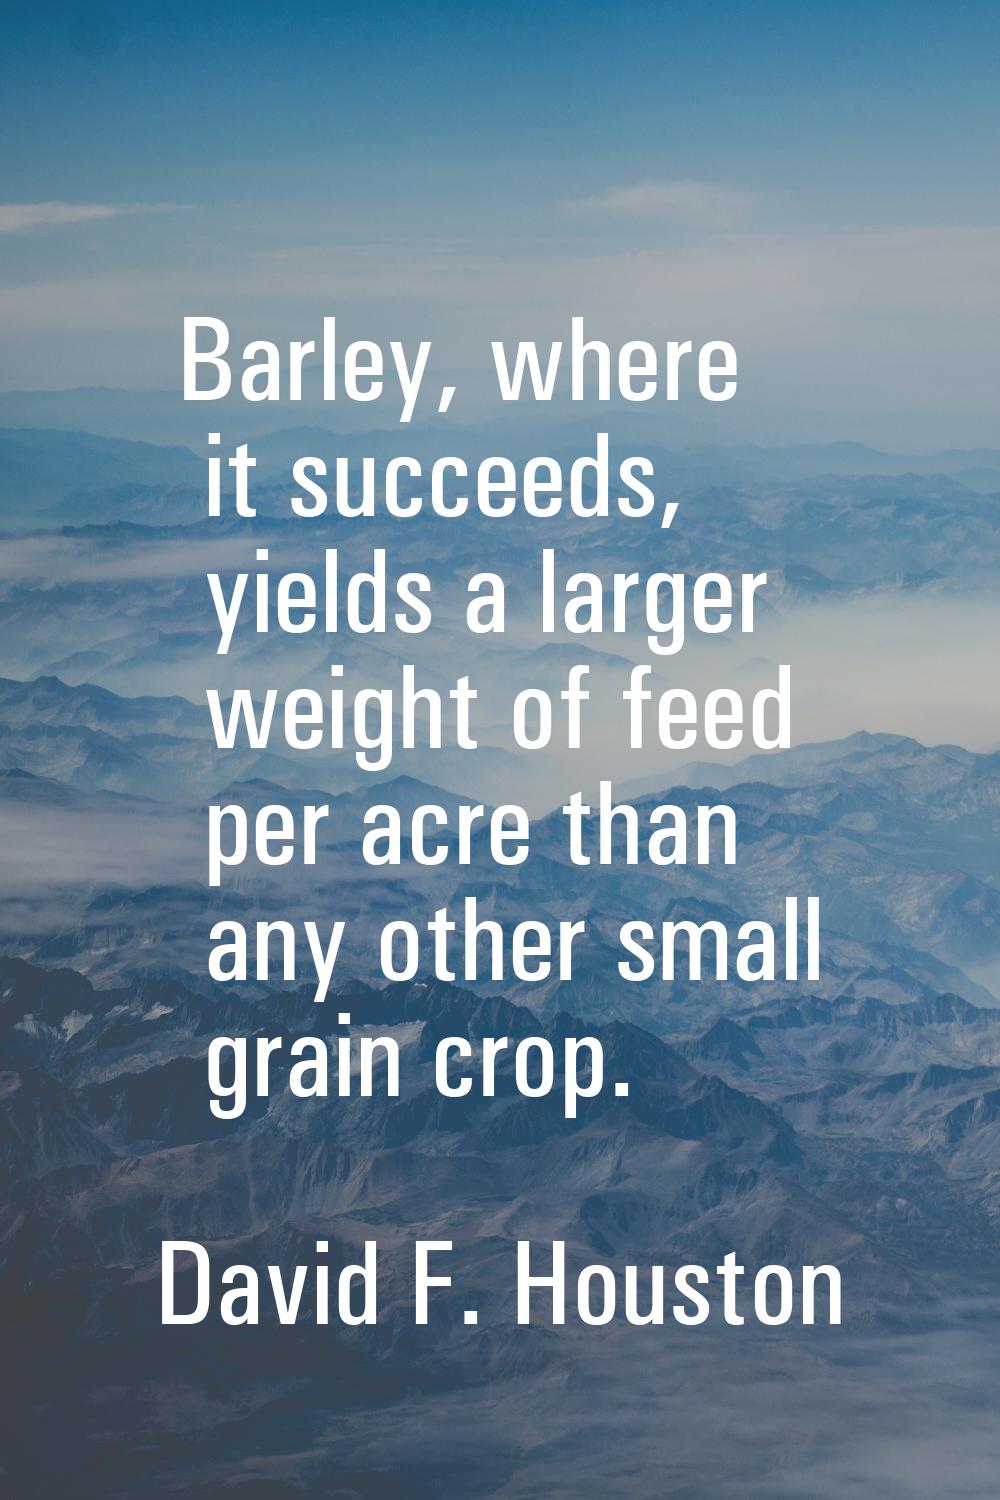 Barley, where it succeeds, yields a larger weight of feed per acre than any other small grain crop.